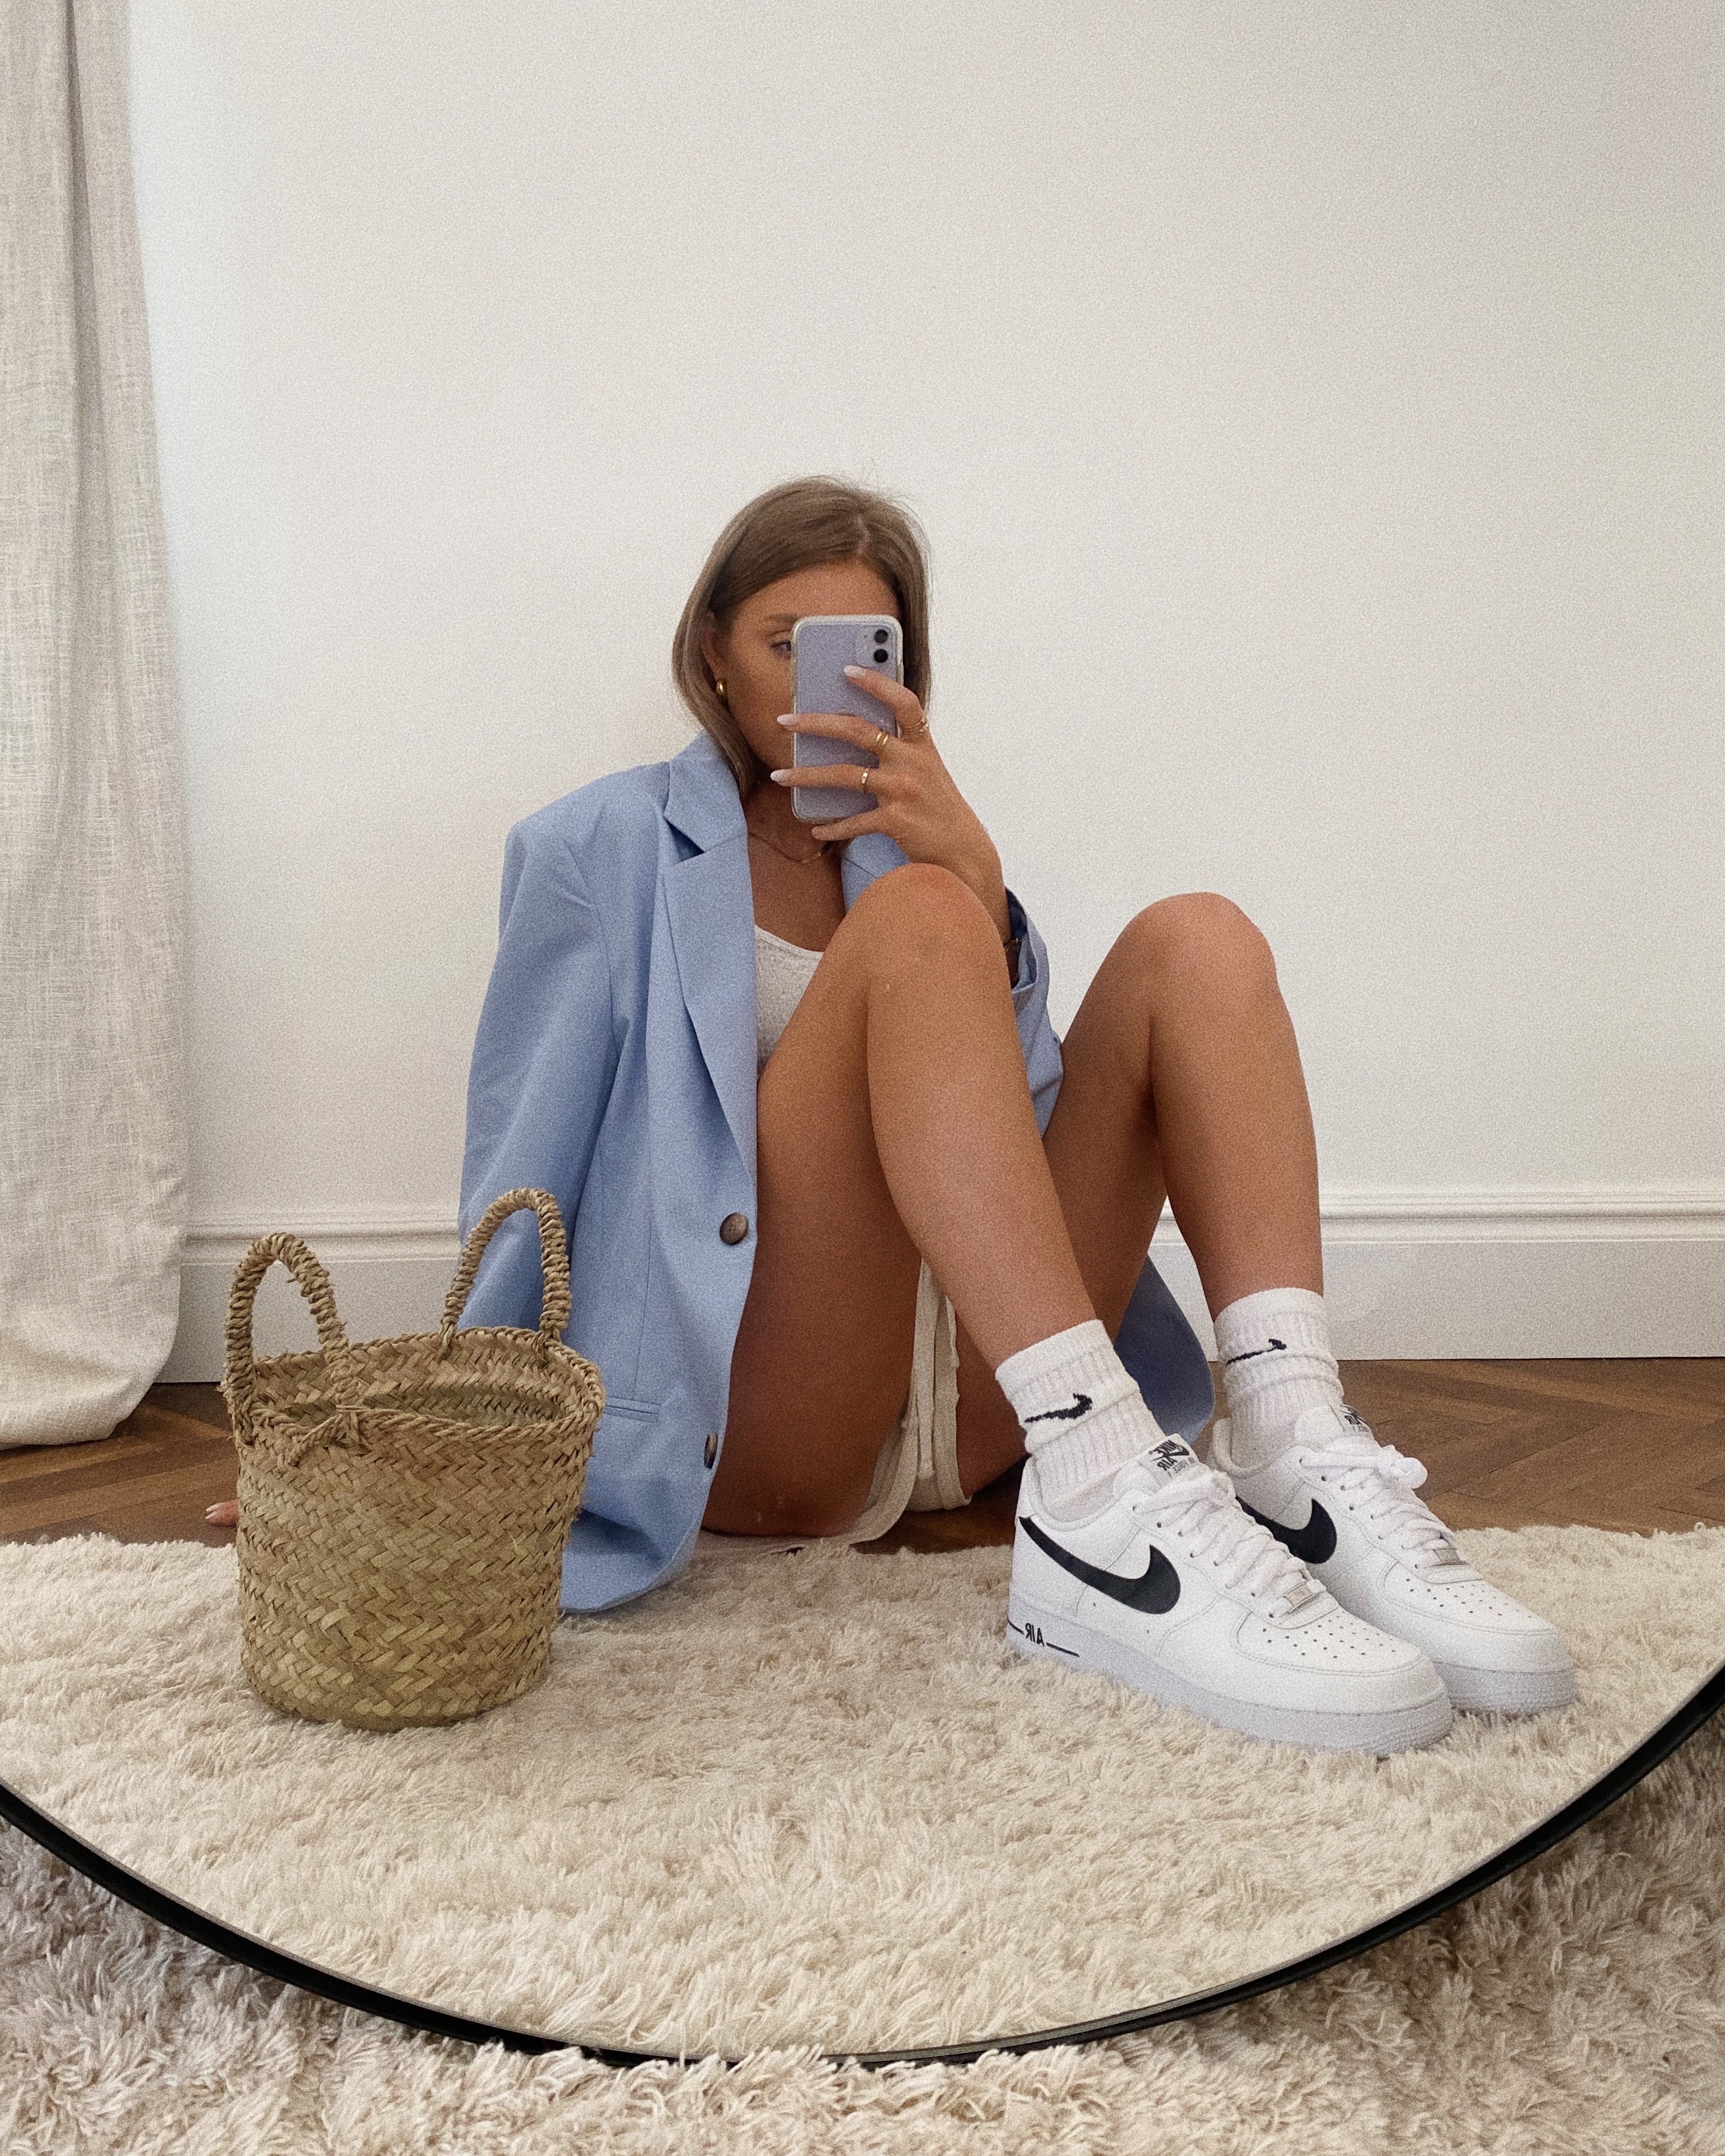 10 Easy Ways To Style Nike 1 This Summer – Love Style Mindfulness – Fashion & Personal Style